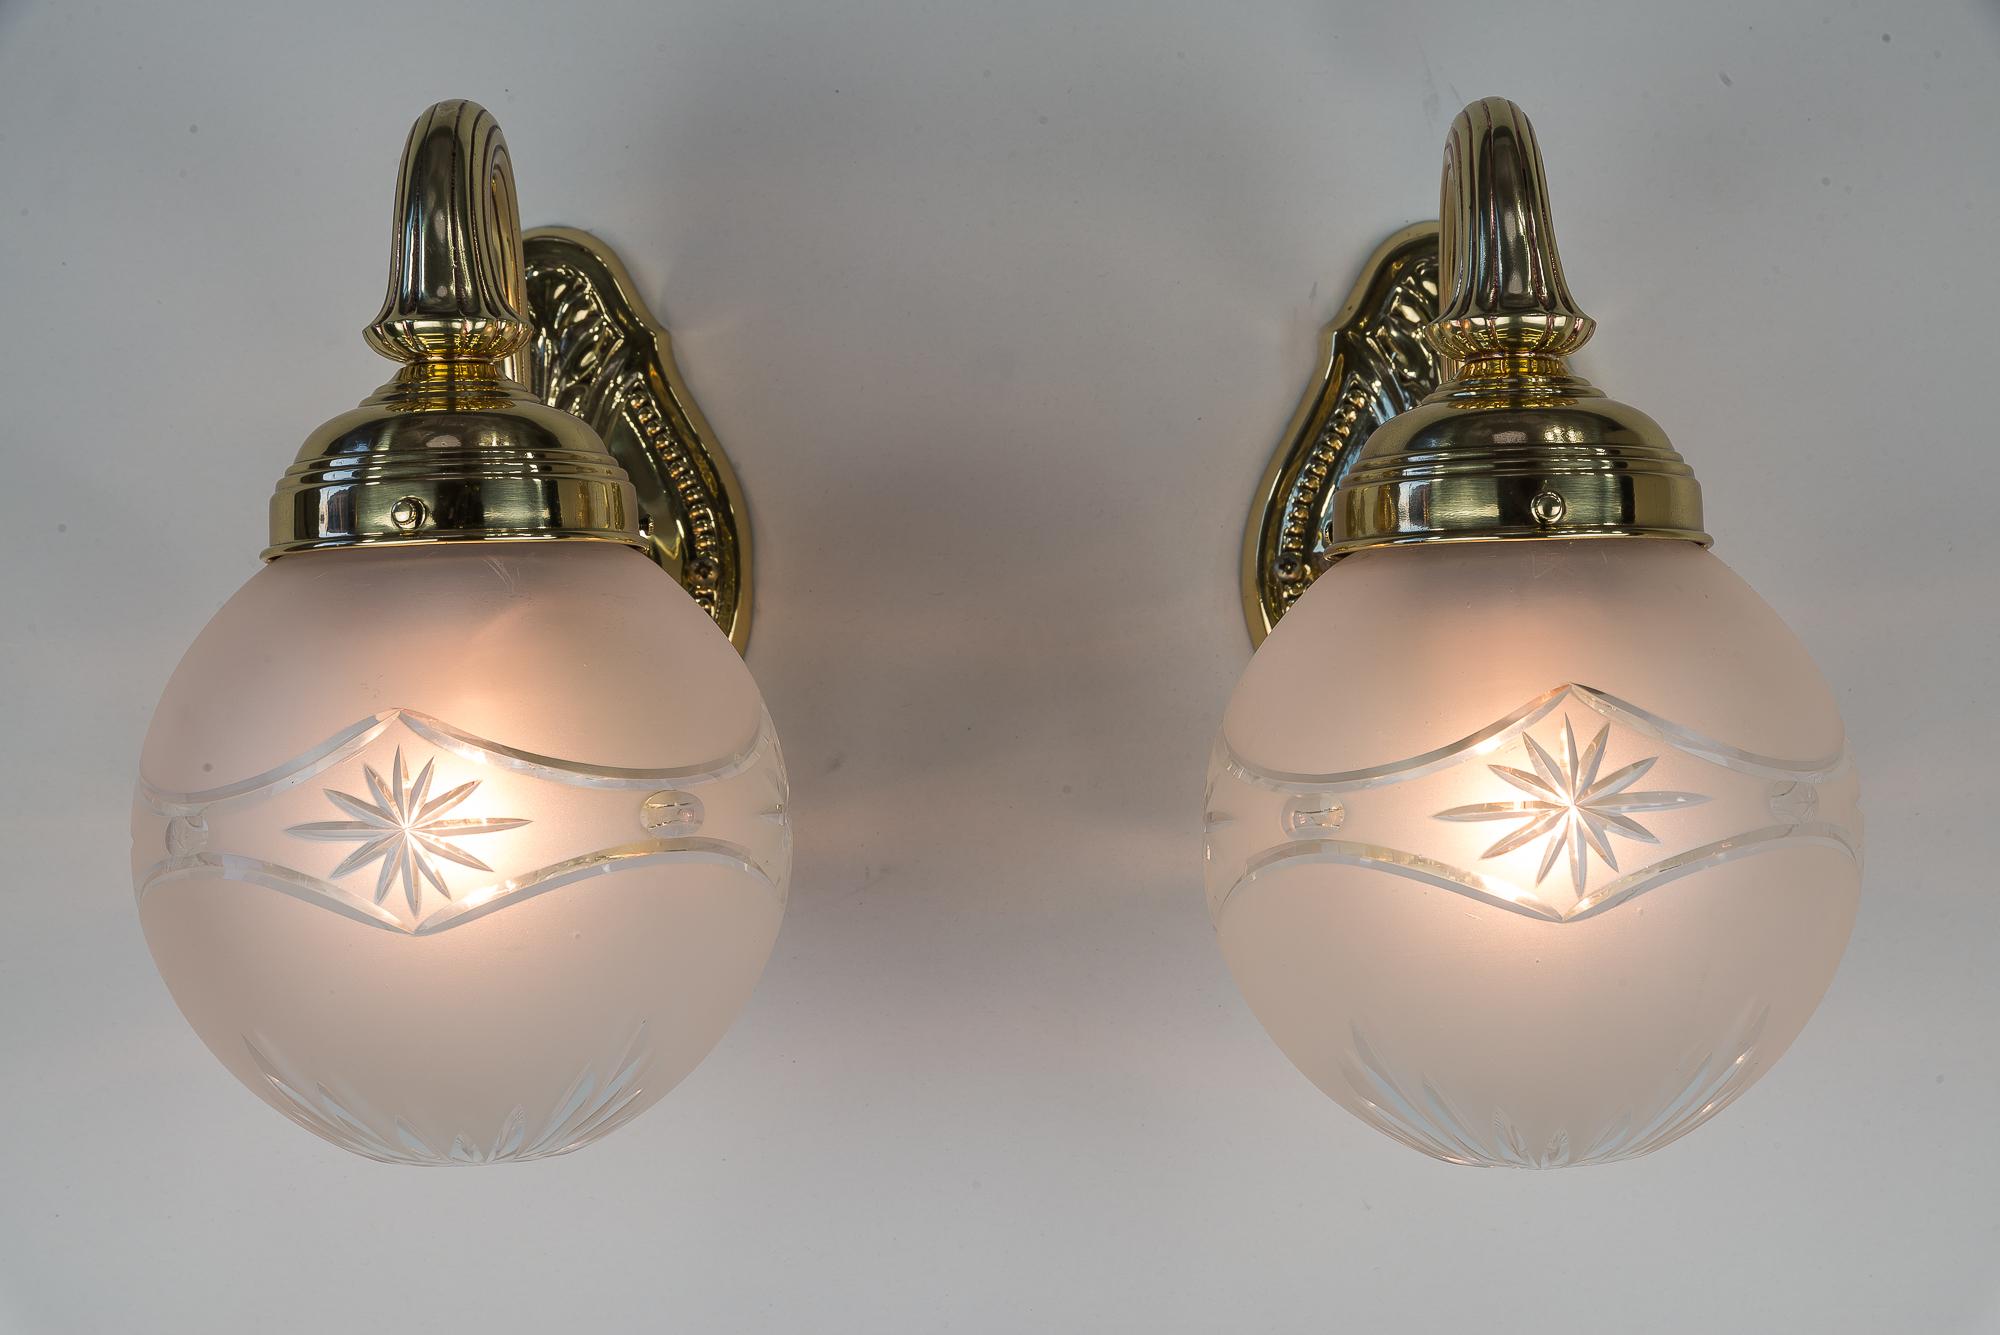 Two Historistic wall lamps around 1890s
Brass polished and stove enameled
Original glass shades.